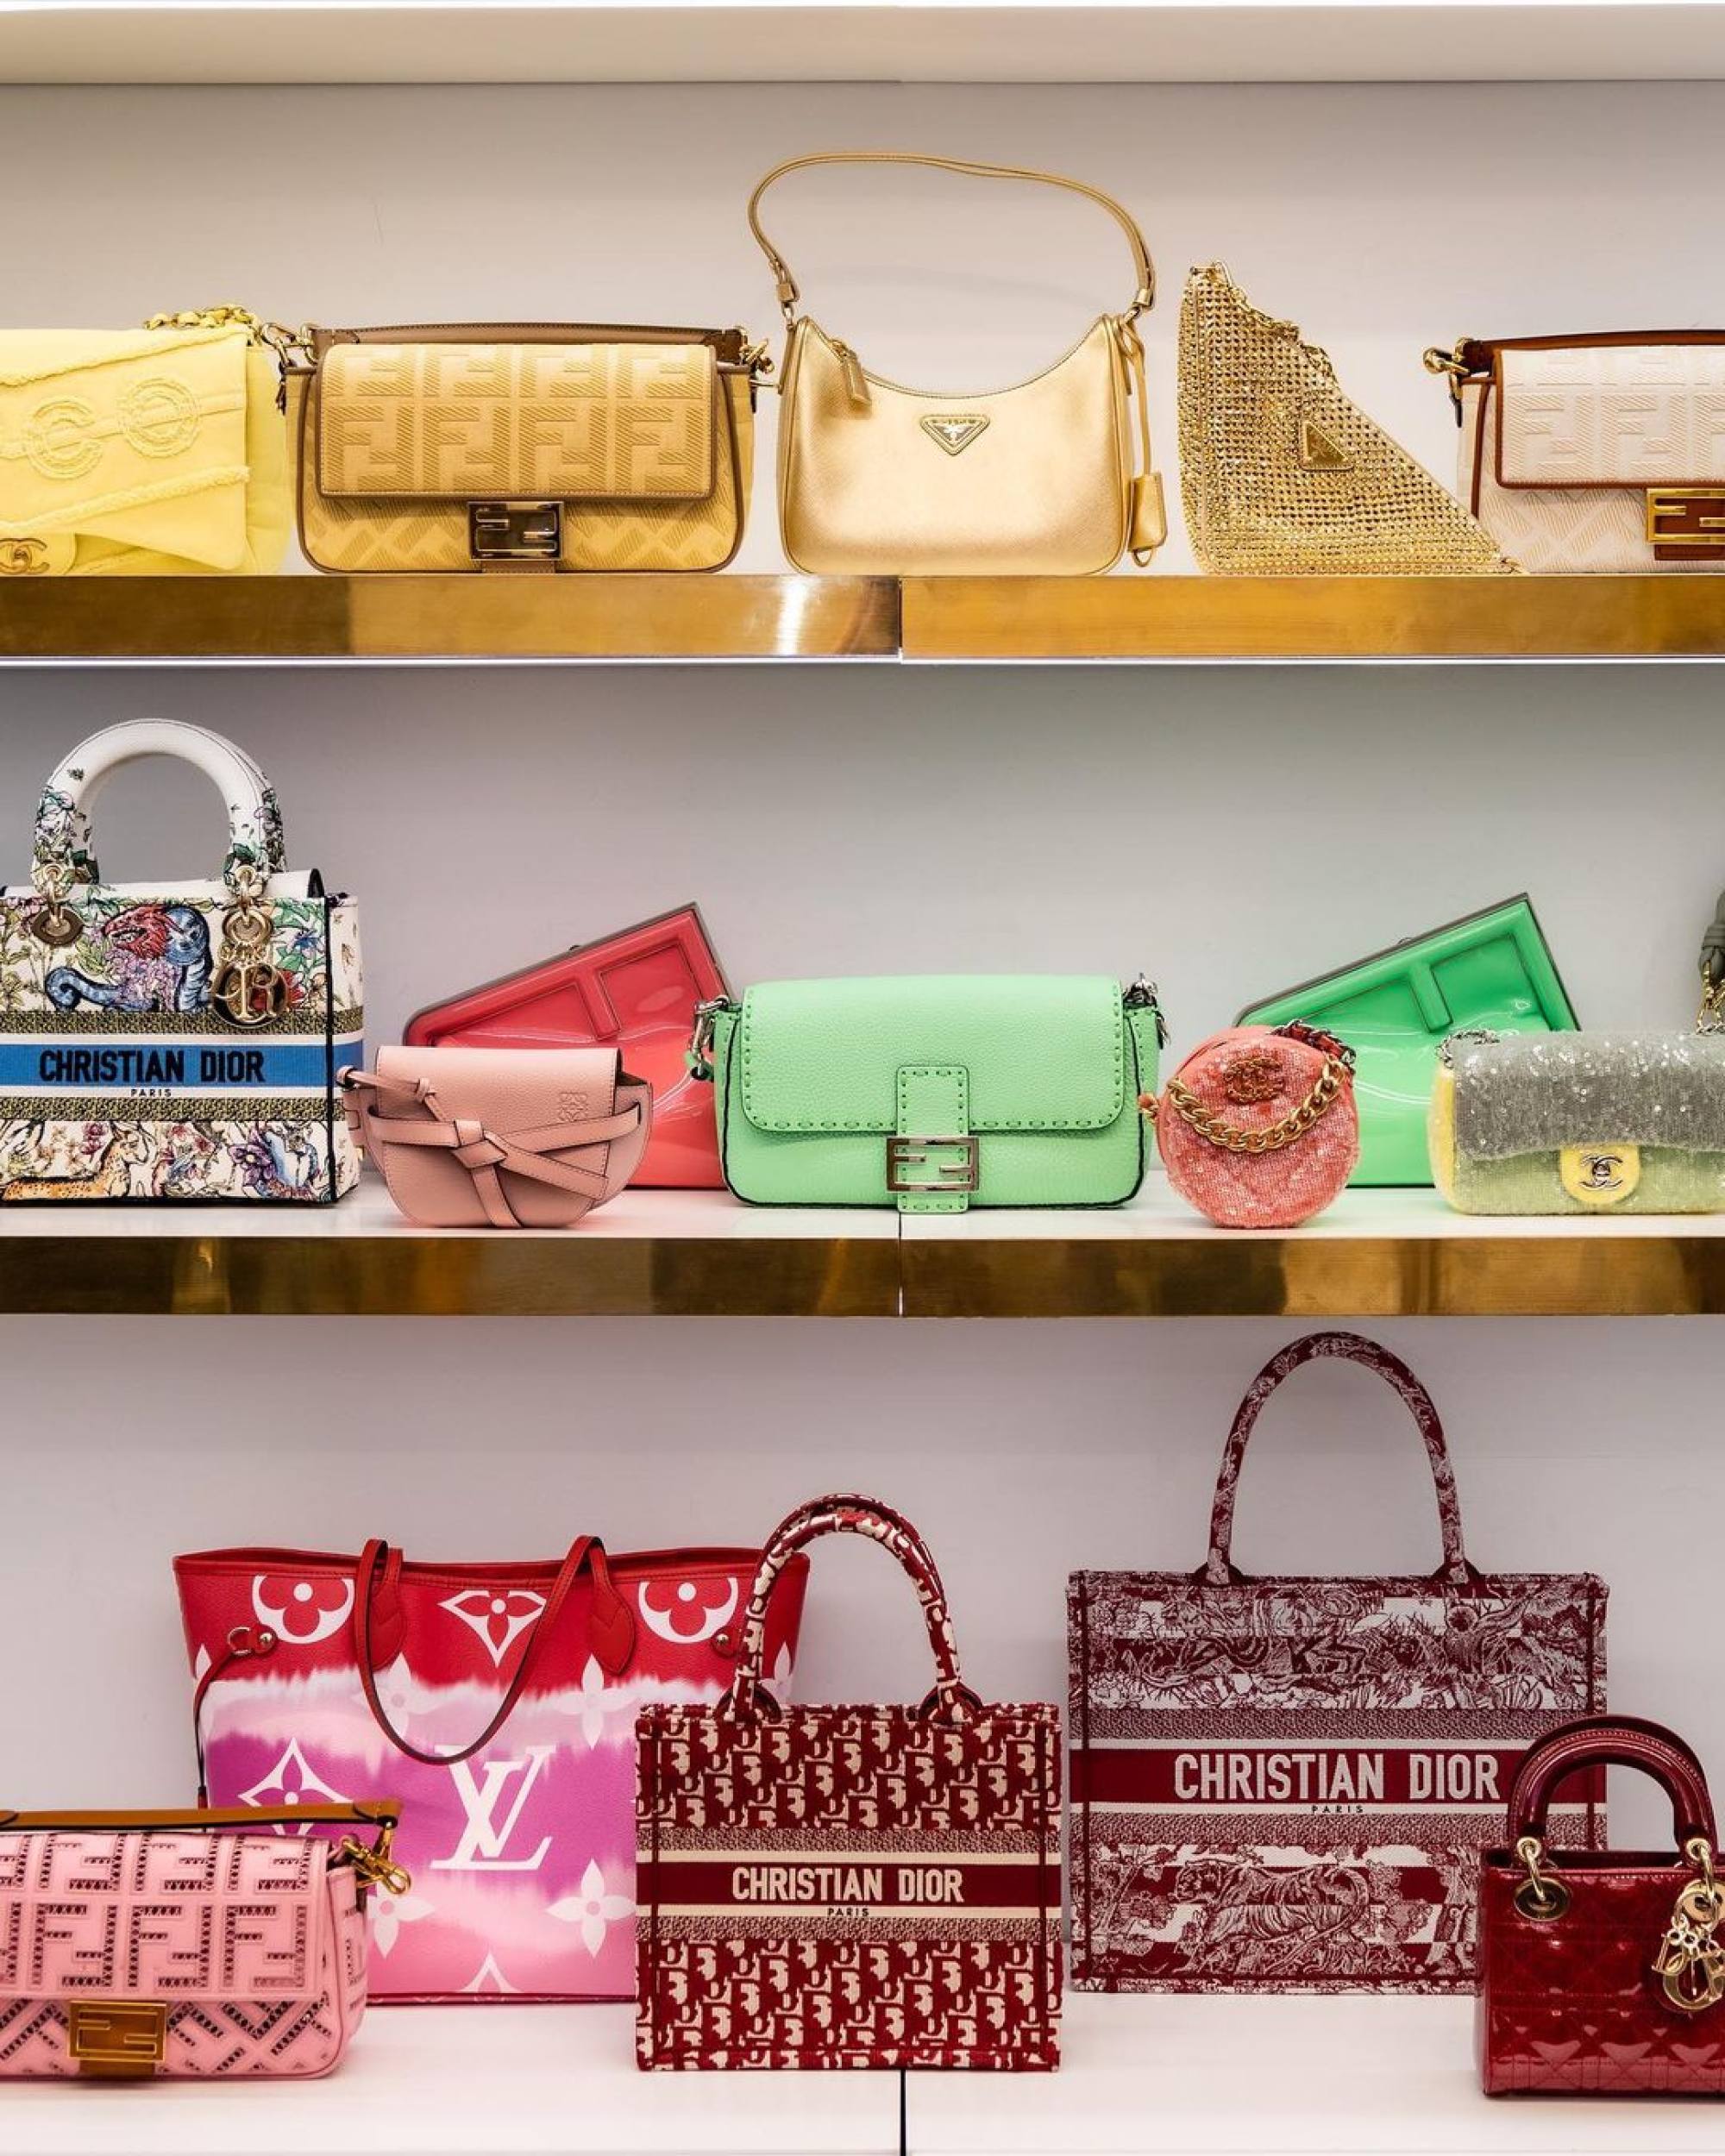 Louis Vuitton Reigns as Top Obsession for Chinese Shoppers in France